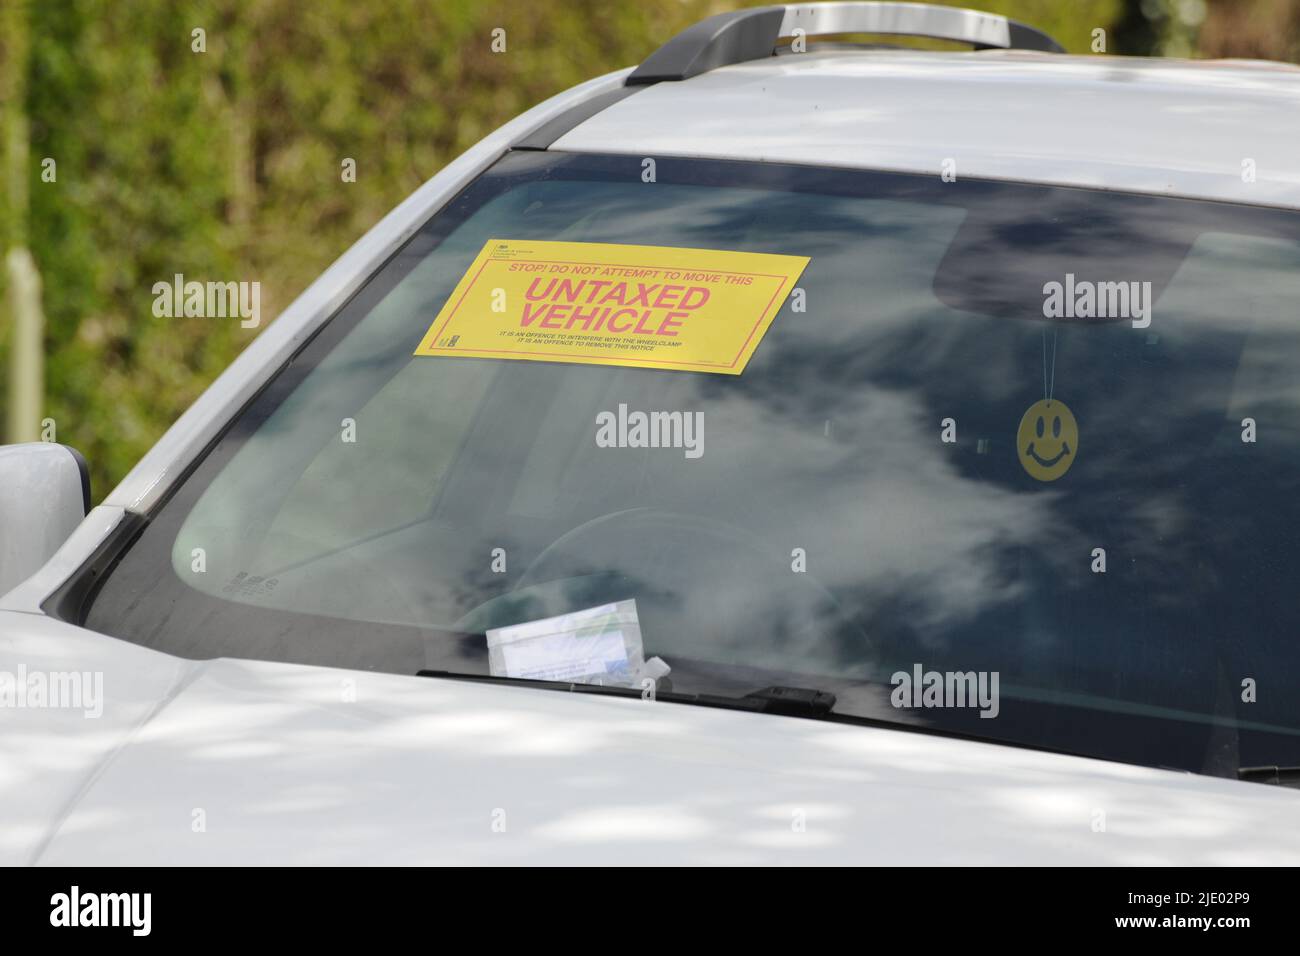 uninsured or untaxed vehicle clamped by roadside Stock Photo